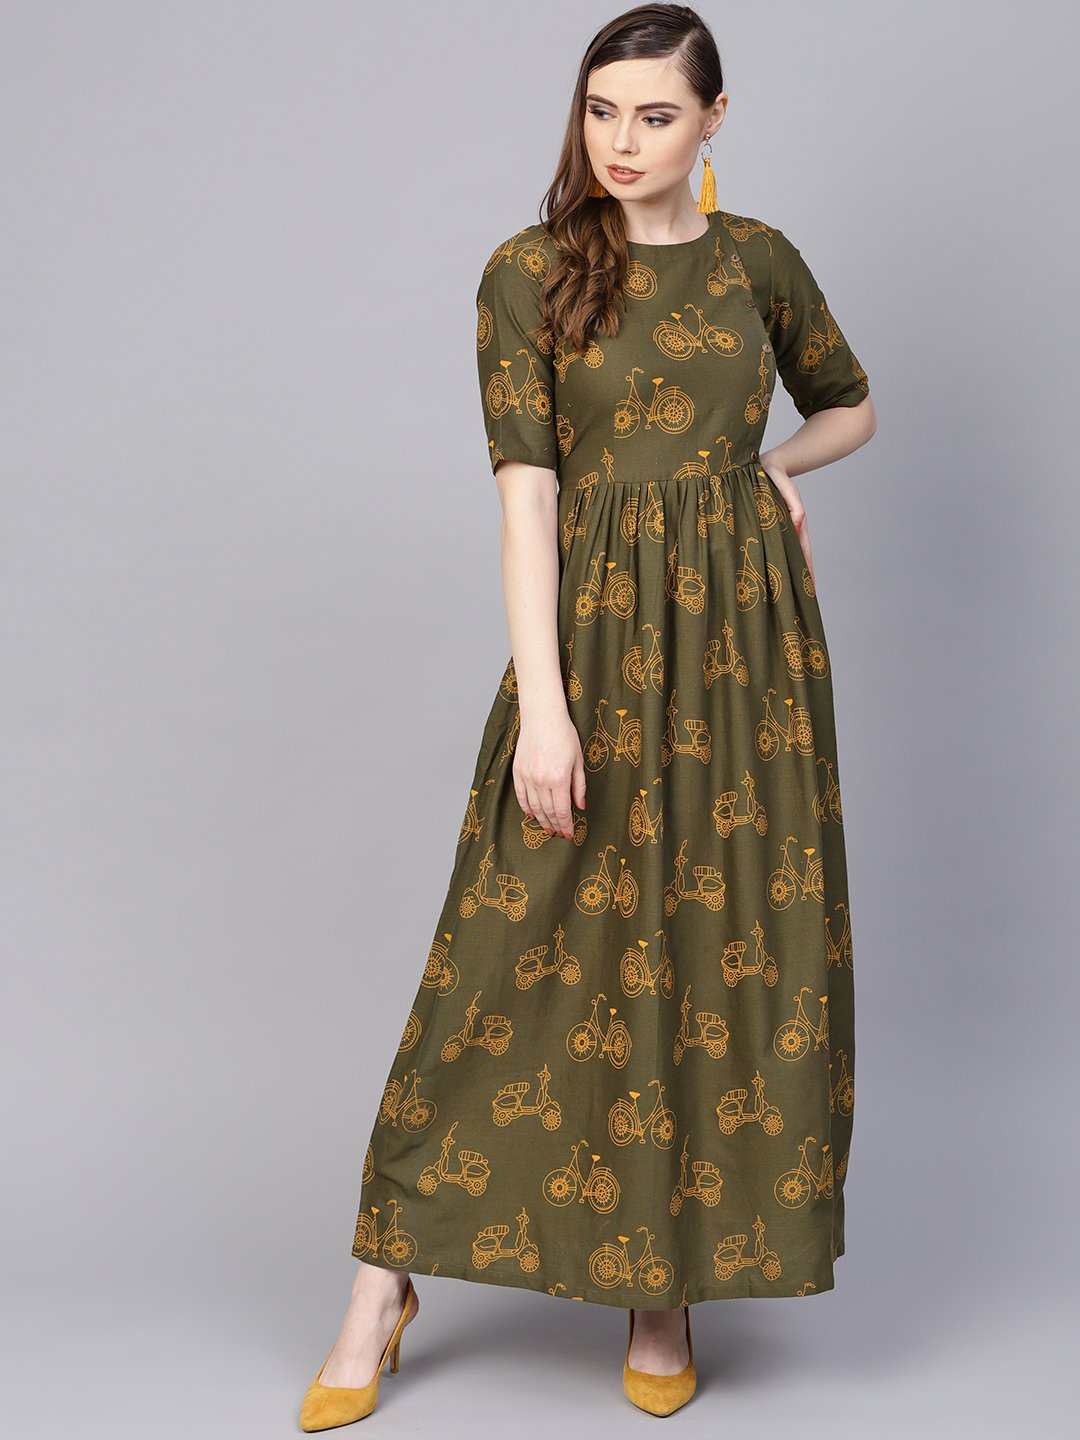 Women's Military Green Printed Maxi Dress With Side Shoulder Placket With Half Sleeves - Nayo Clothing